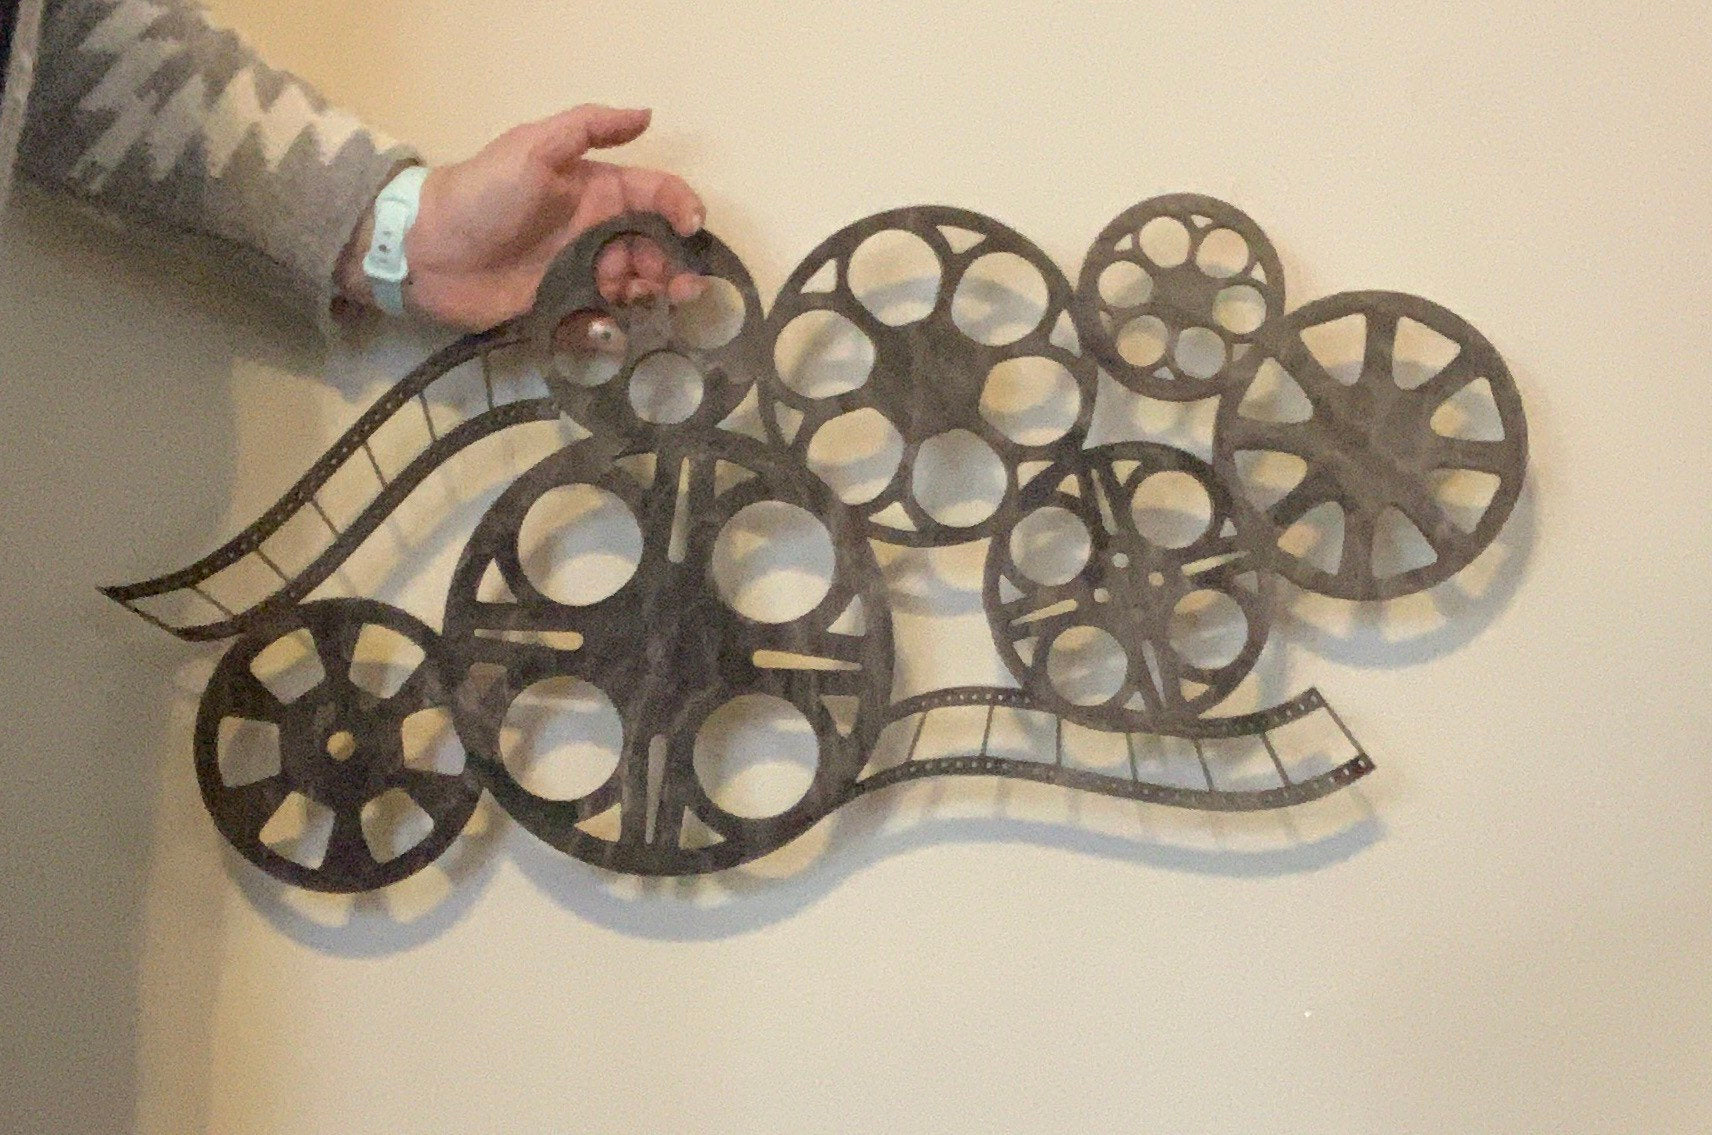 Movie Reels and Film Collage Laser Cut Wood Wall Hanging – MrsHandPainted